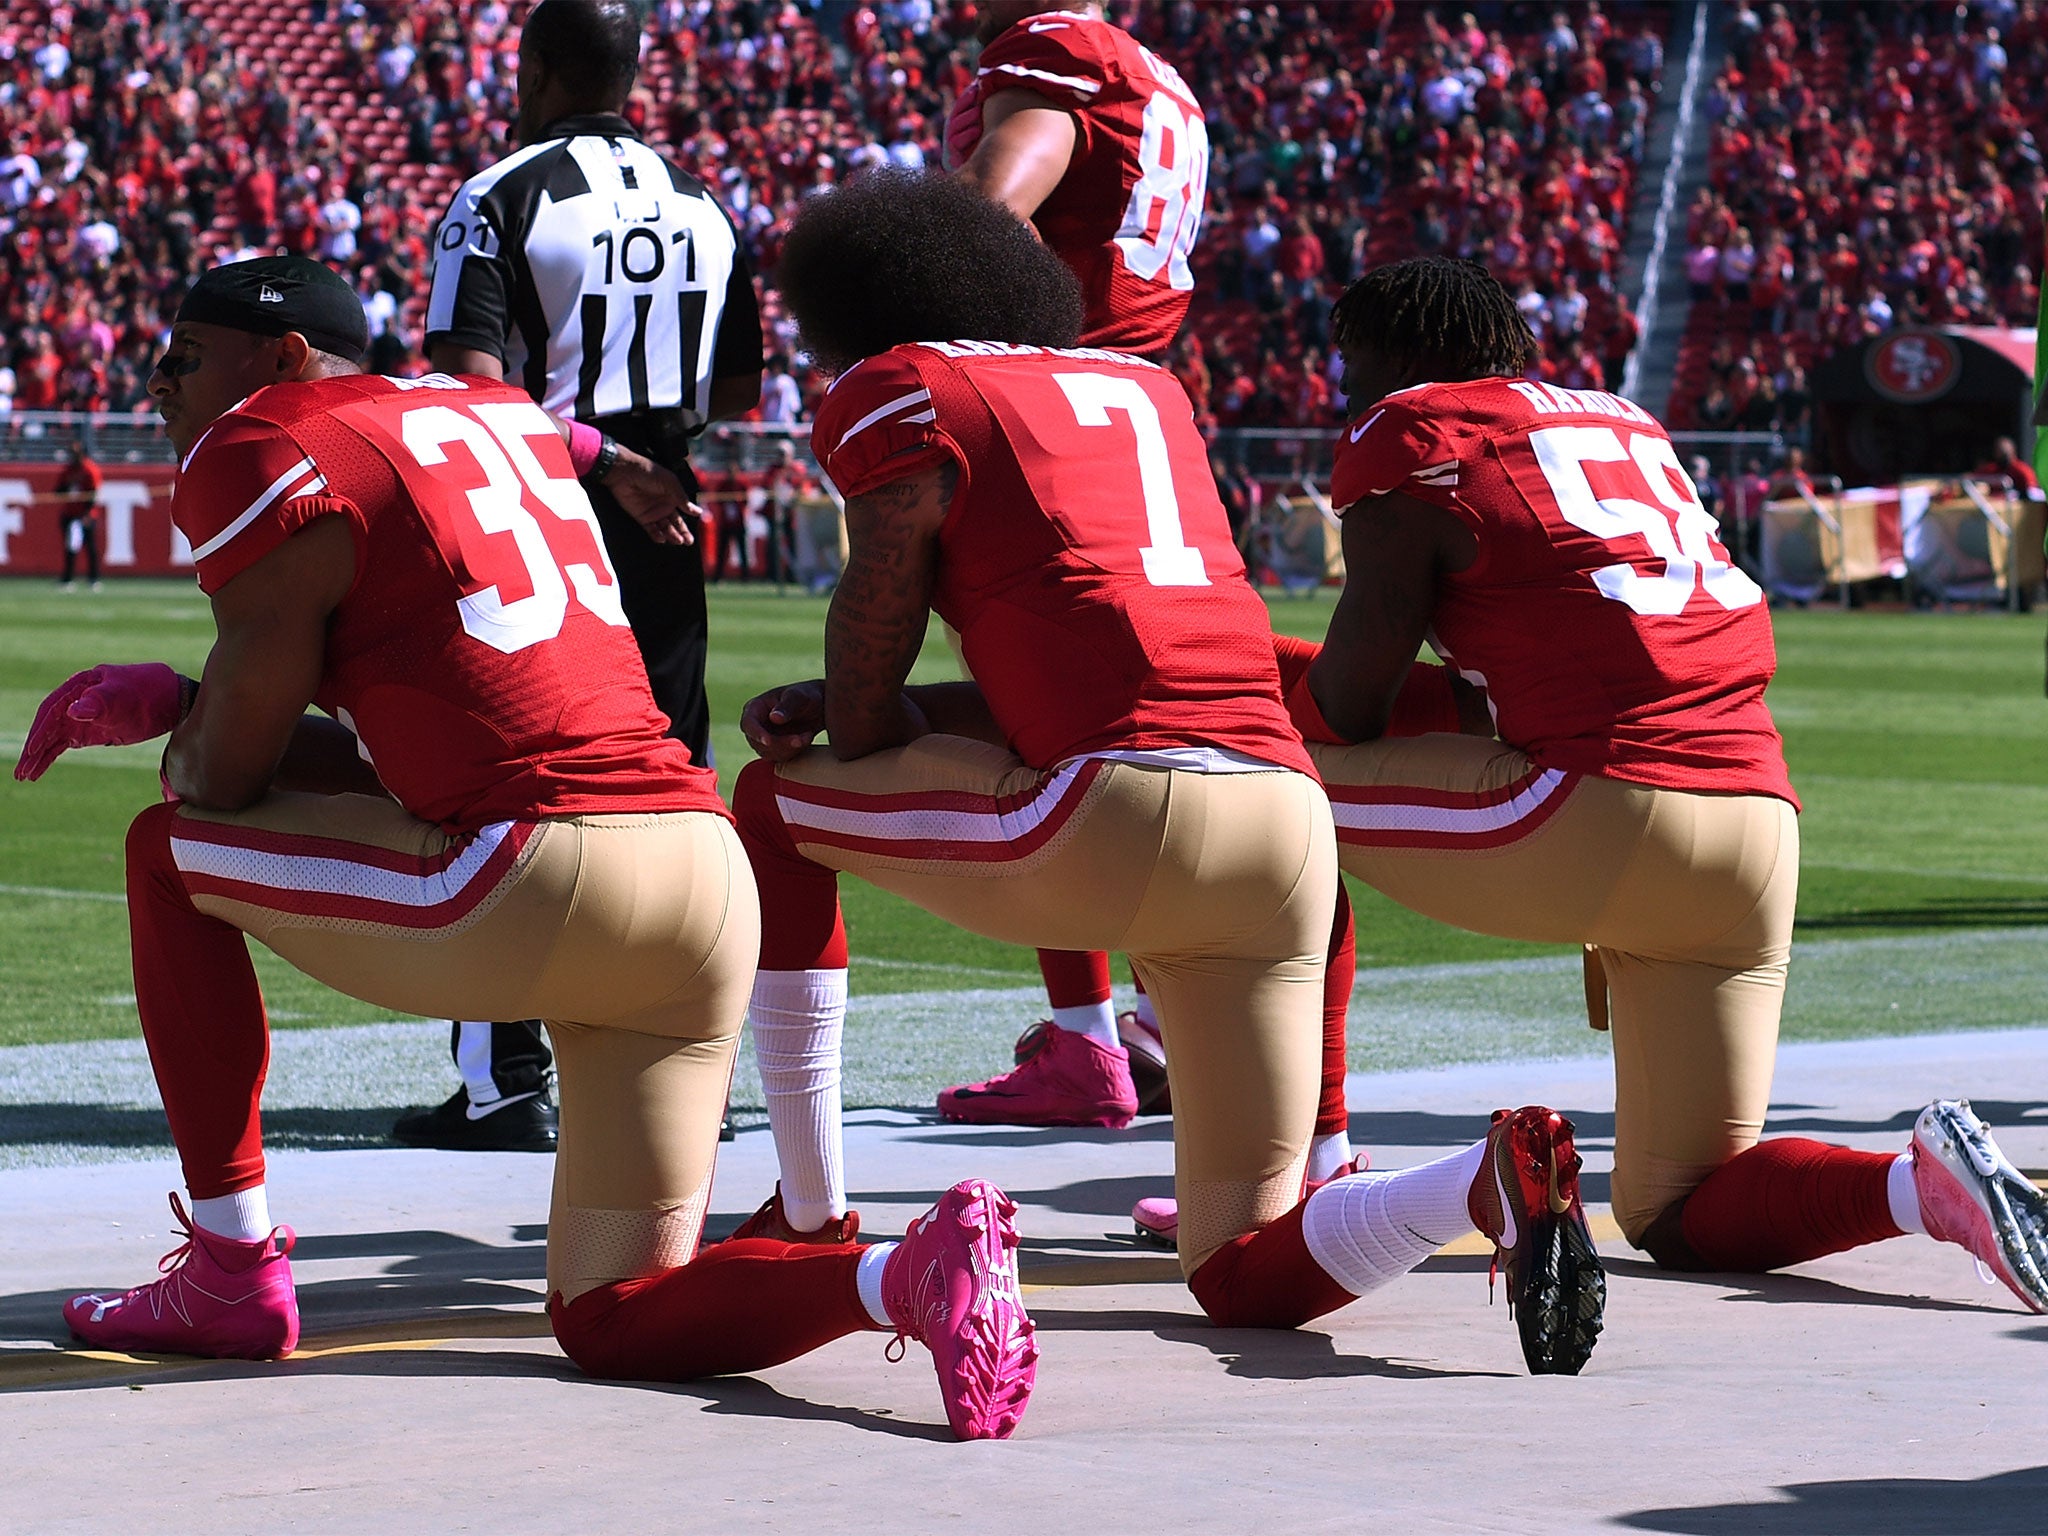 Colin Kaepernick kneels for the American national anthem in 2016